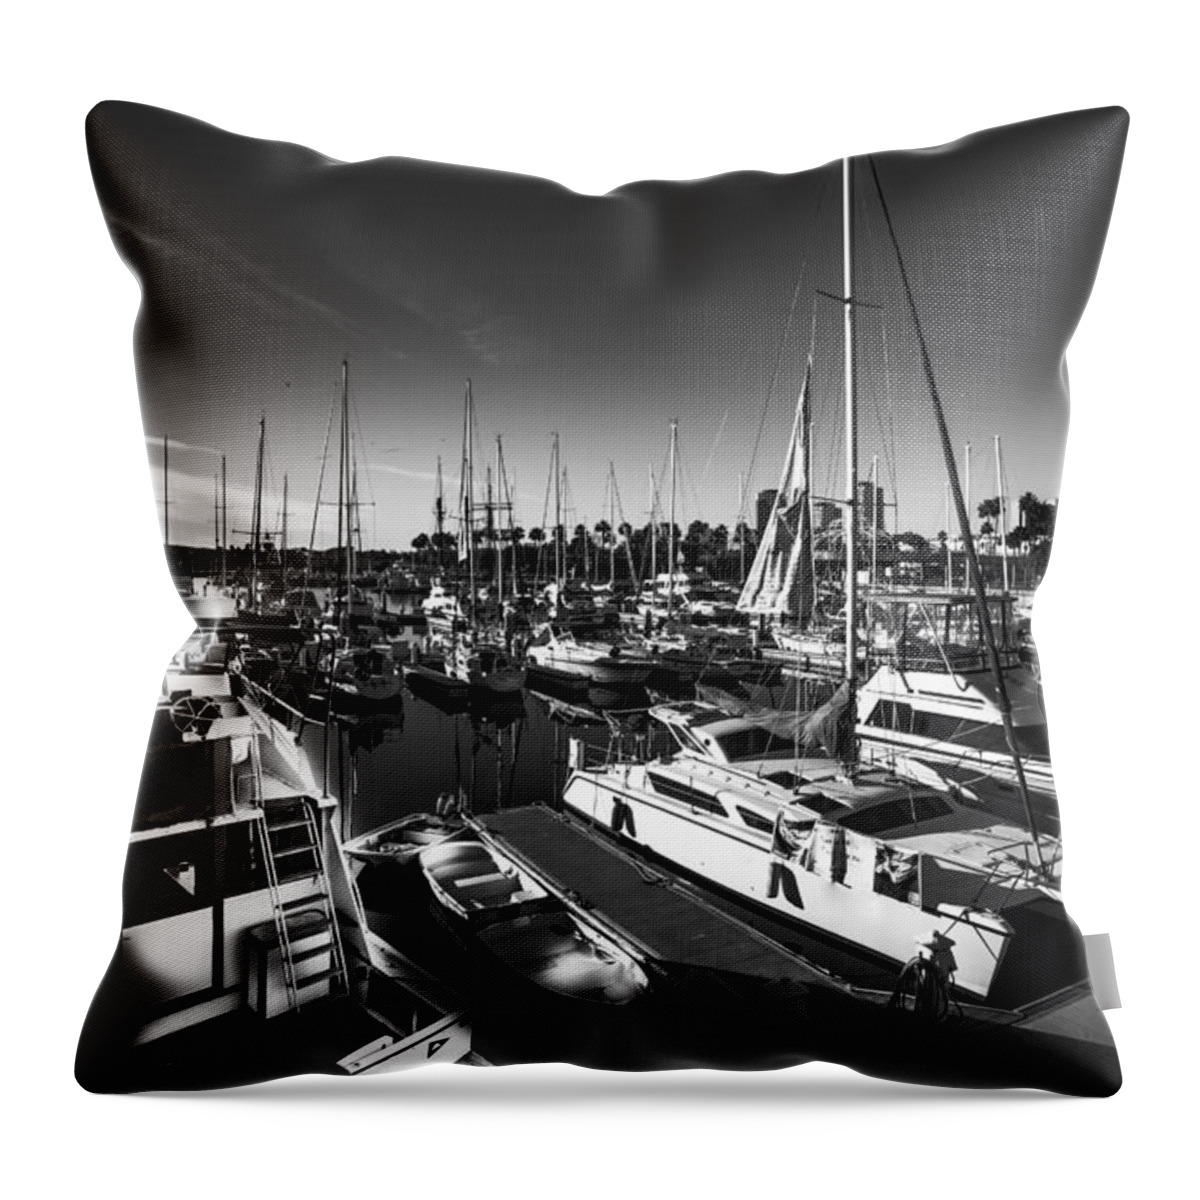 California Landscape Throw Pillow featuring the photograph Yacht At The Pier by Sviatlana Kandybovich